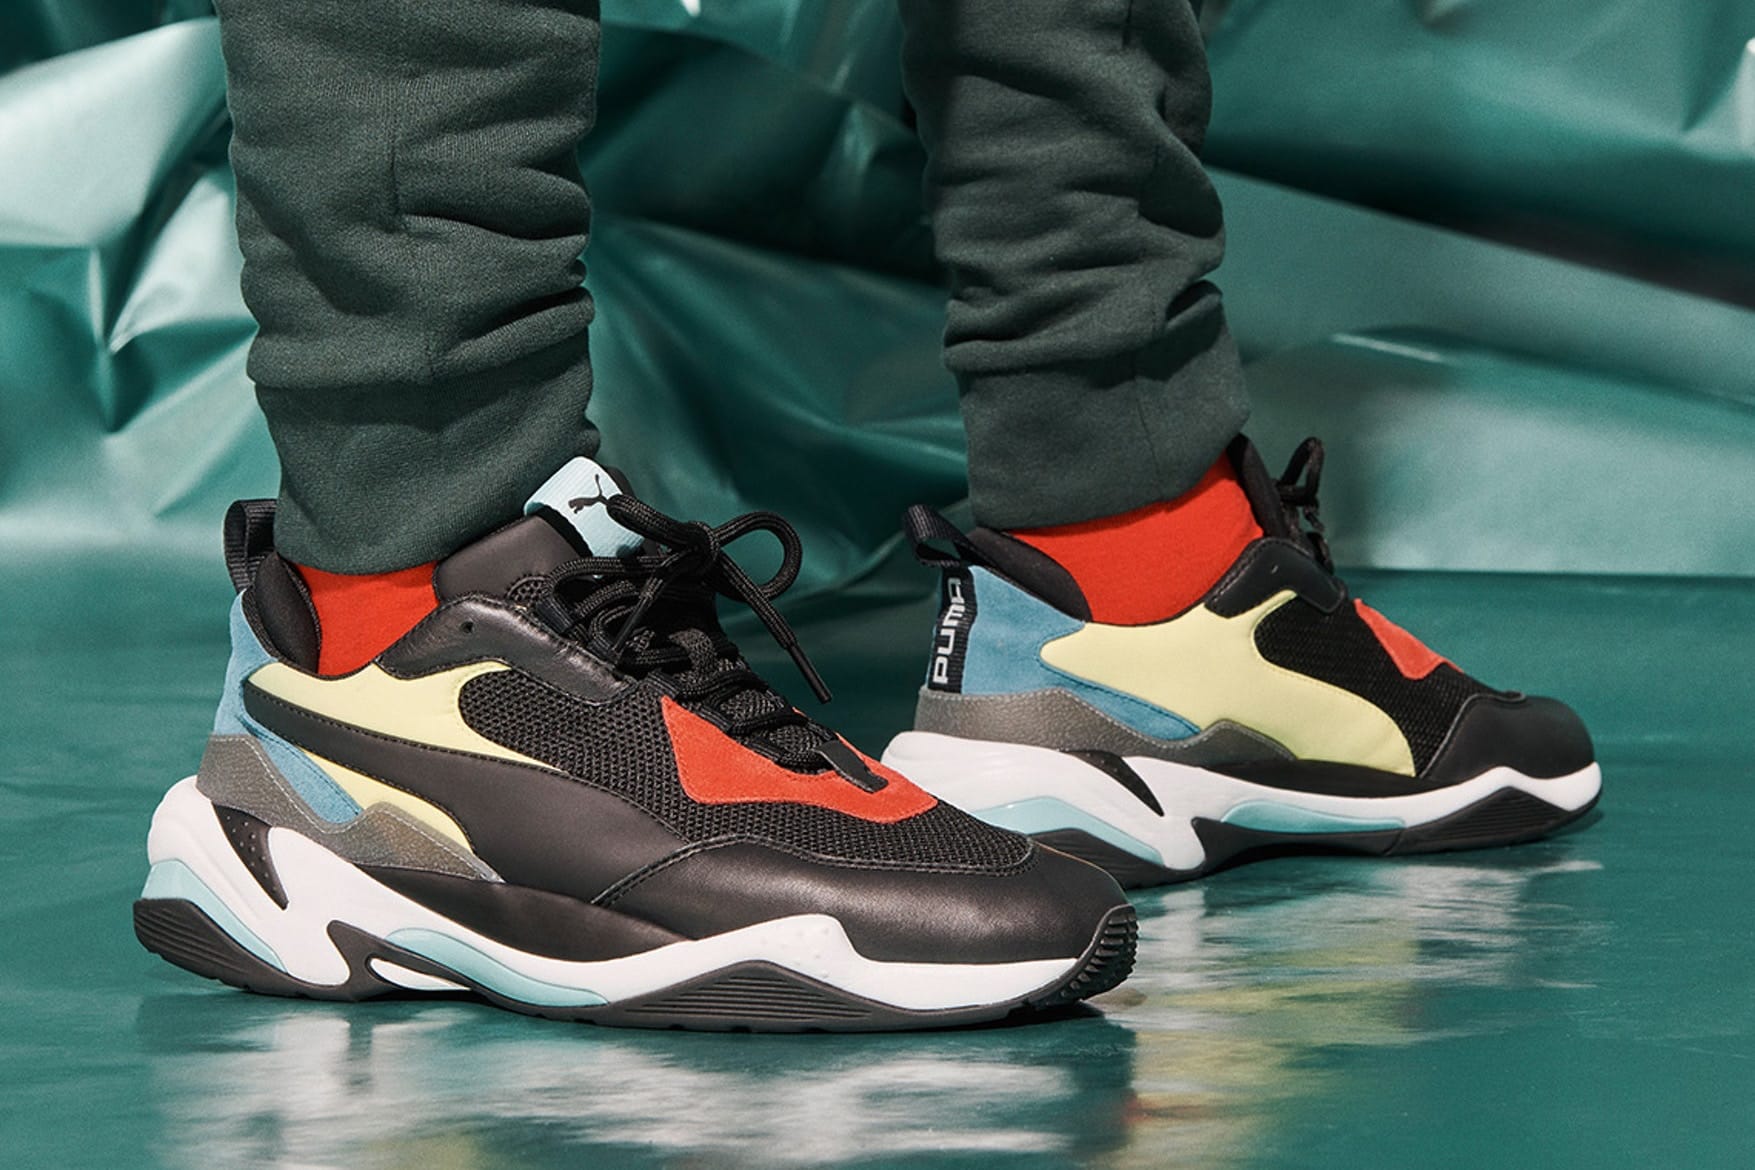 puma thunder spectra homme blanche